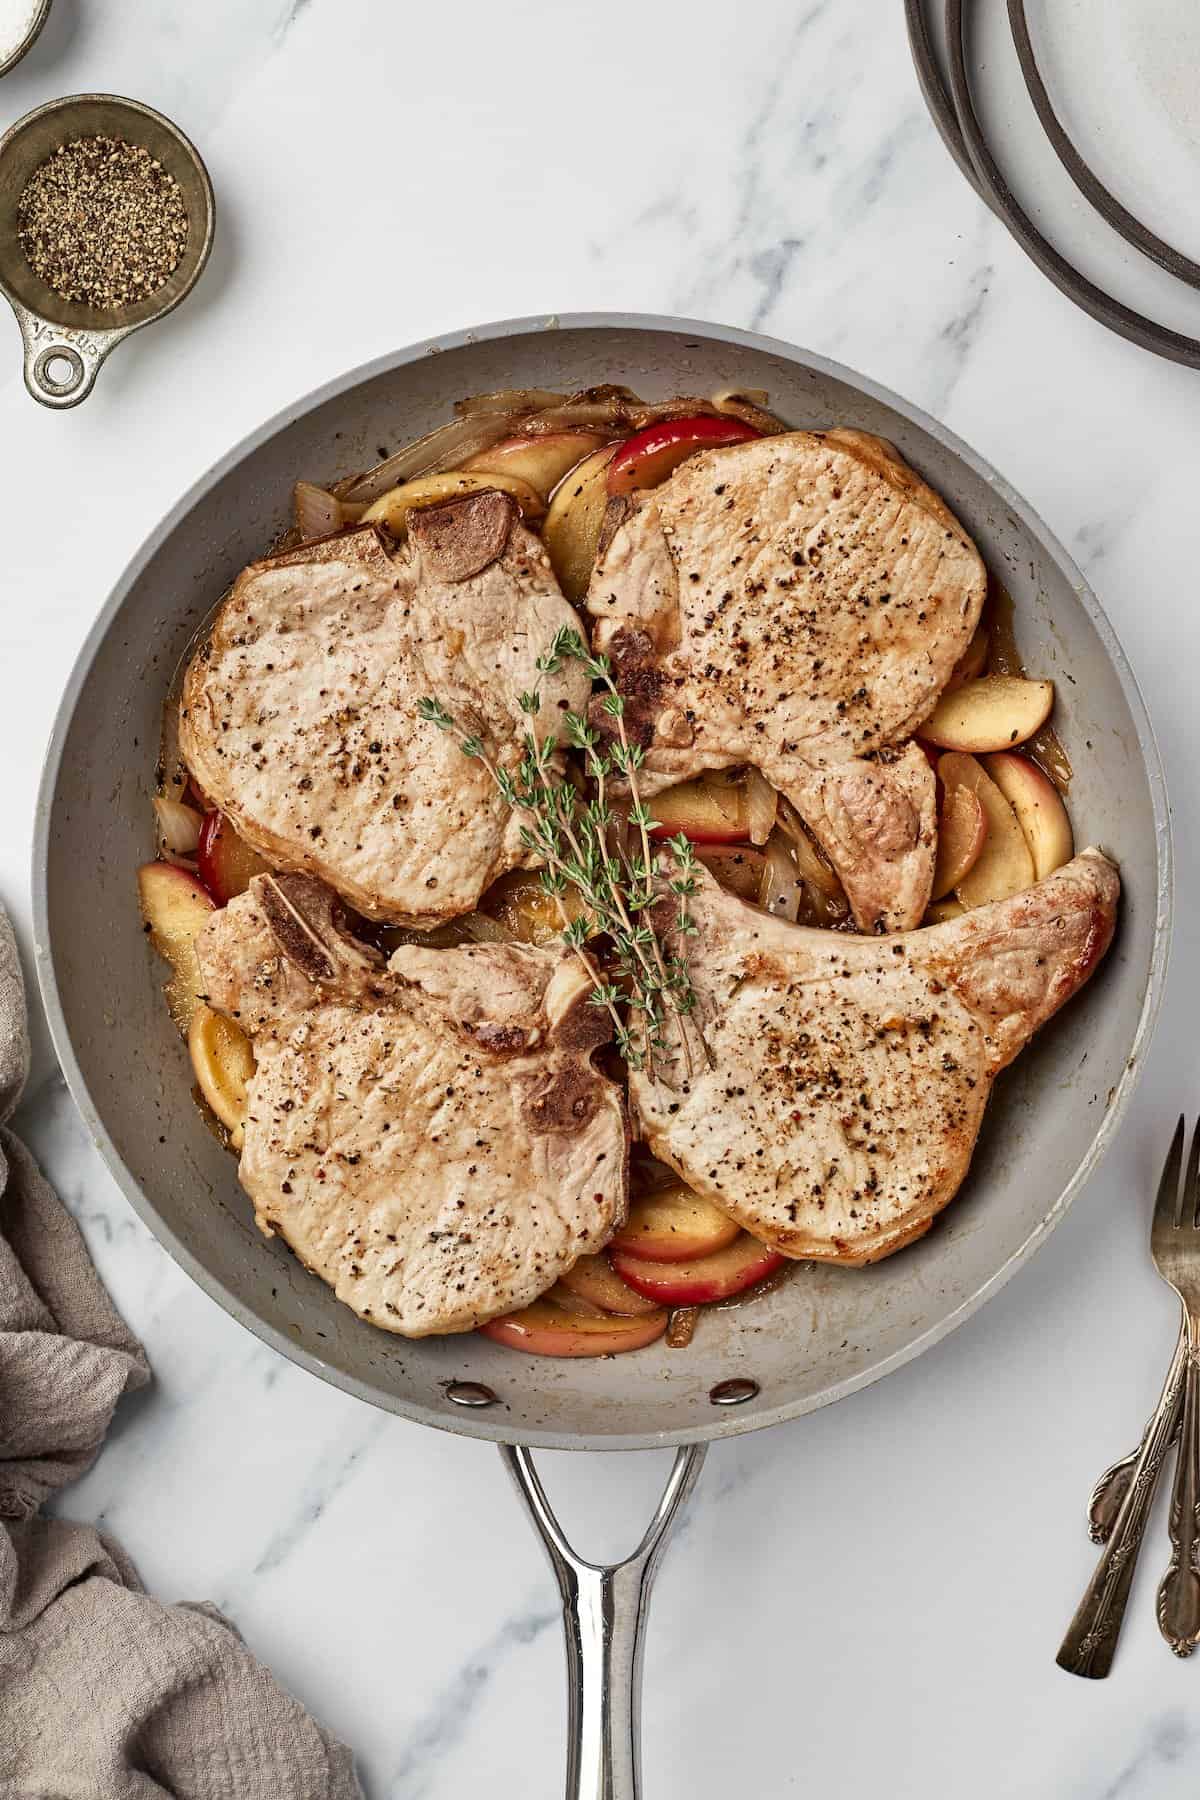 Overhead view of pork chops with apples and onions in skillet